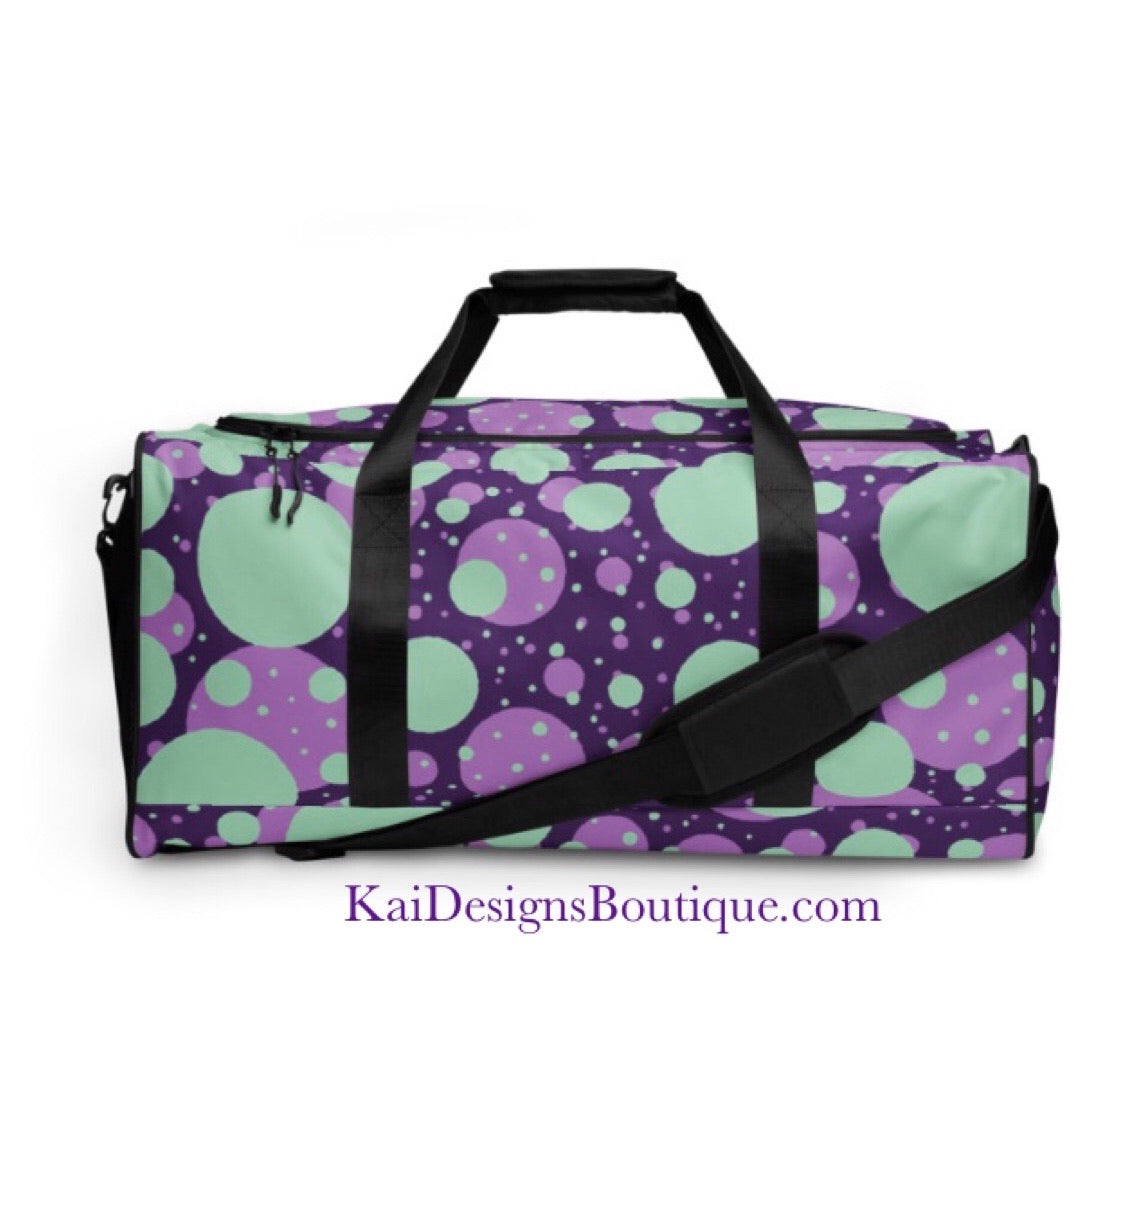 This Kai Designs Duffel Bag is the perfect spacious bag no matter the occasion. 